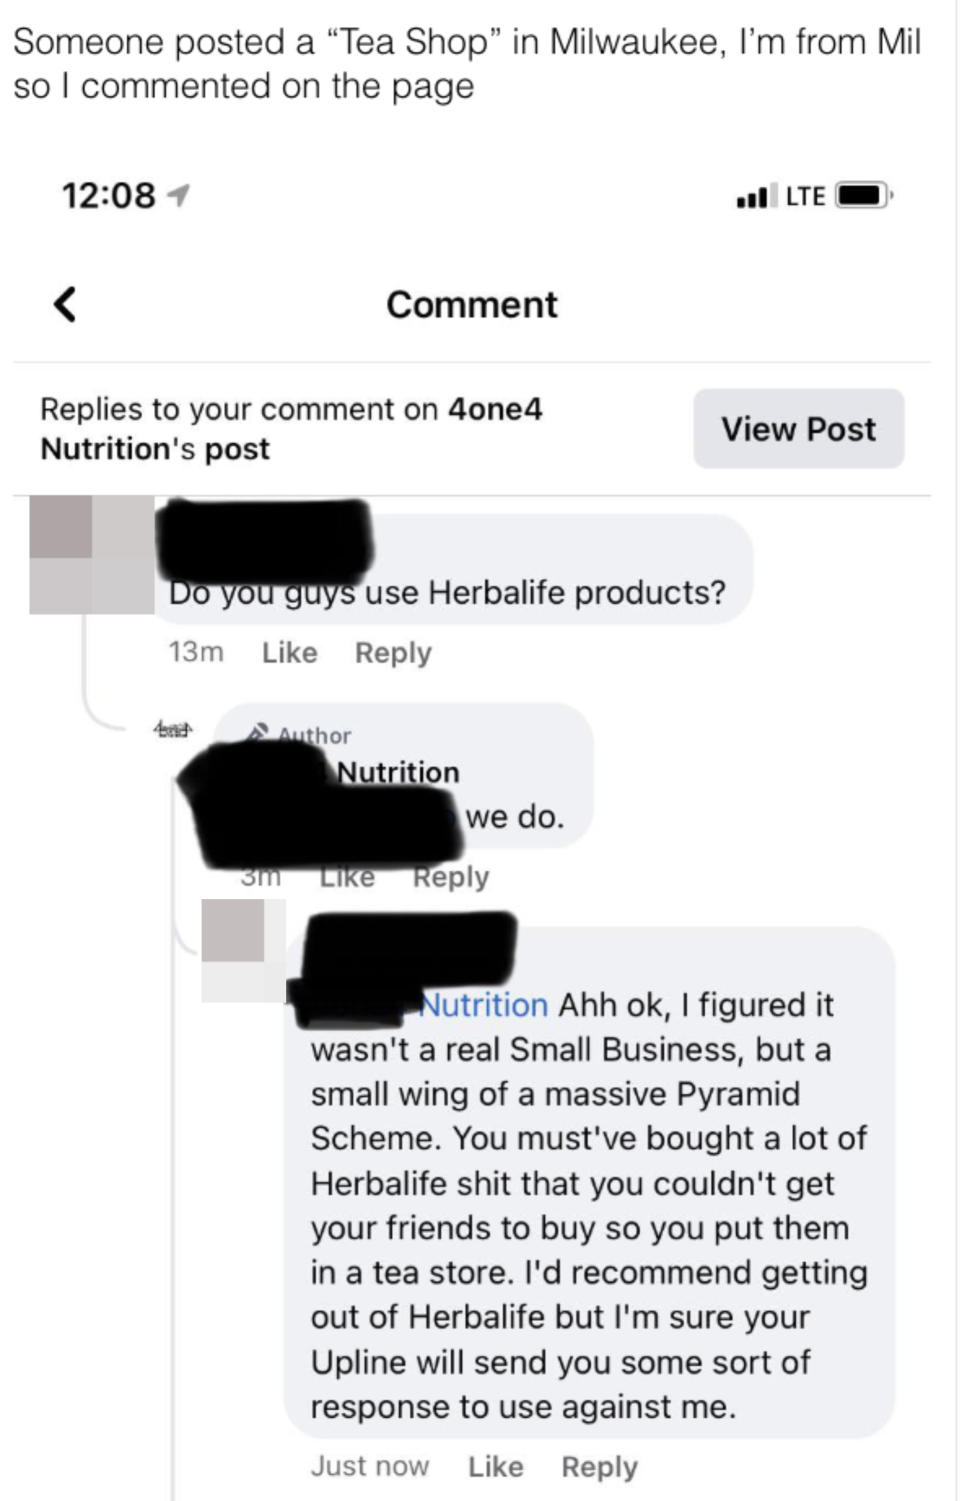 In response to question about liking Herbalife, they replied they figured it wasn't a real small business but a small wing of a massive pyramid scheme, and the person must've bought a massive amount of it that they couldn't get rid of